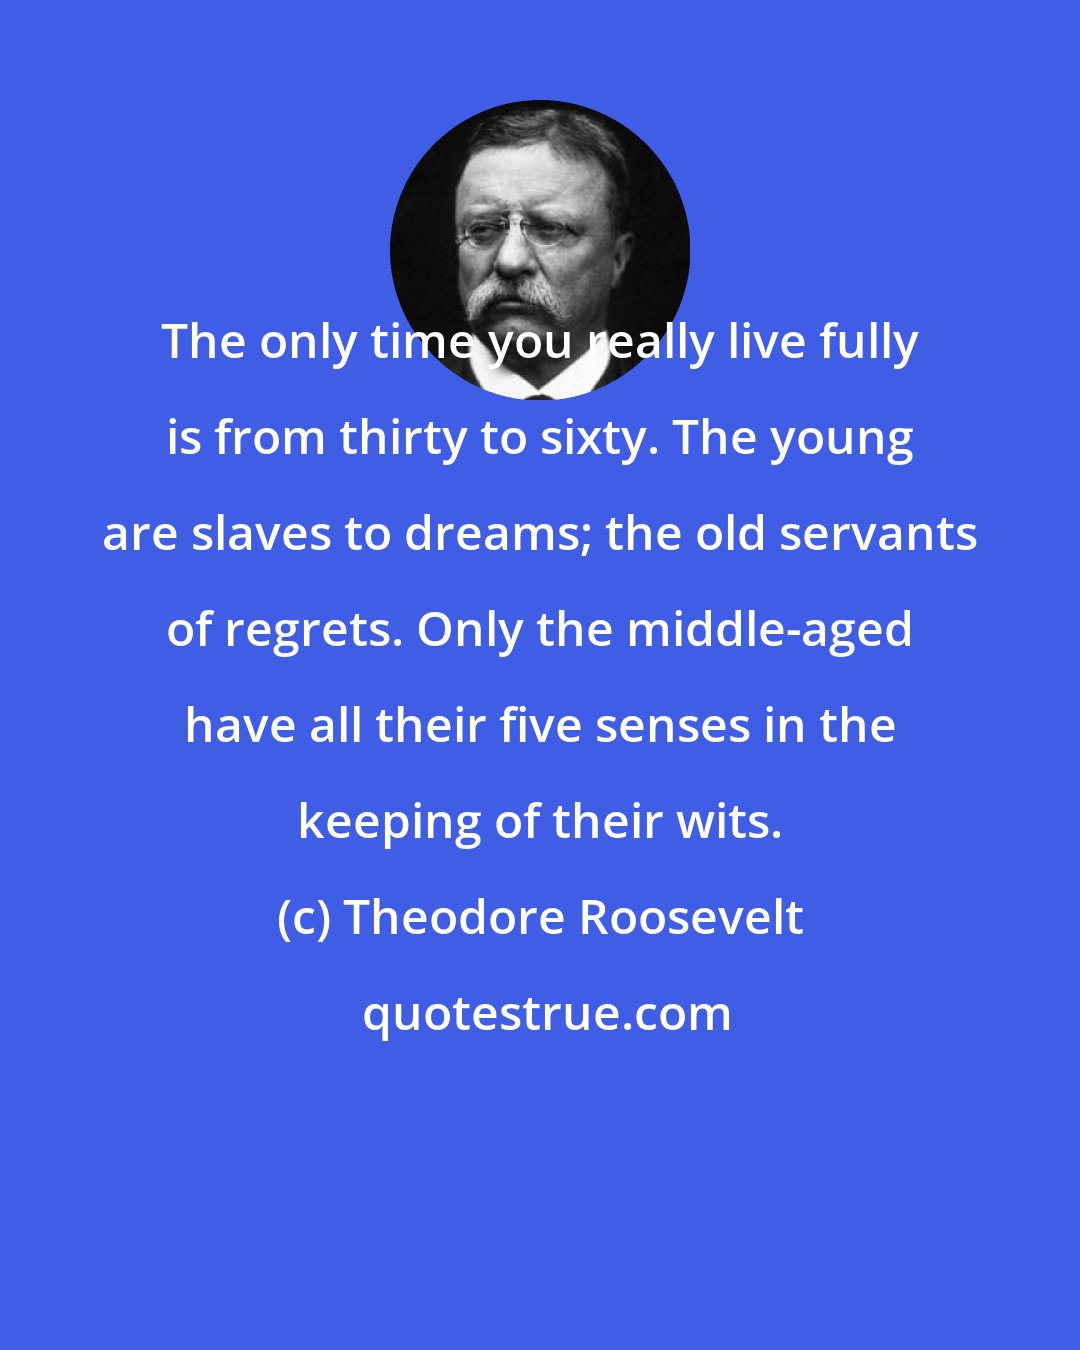 Theodore Roosevelt: The only time you really live fully is from thirty to sixty. The young are slaves to dreams; the old servants of regrets. Only the middle-aged have all their five senses in the keeping of their wits.